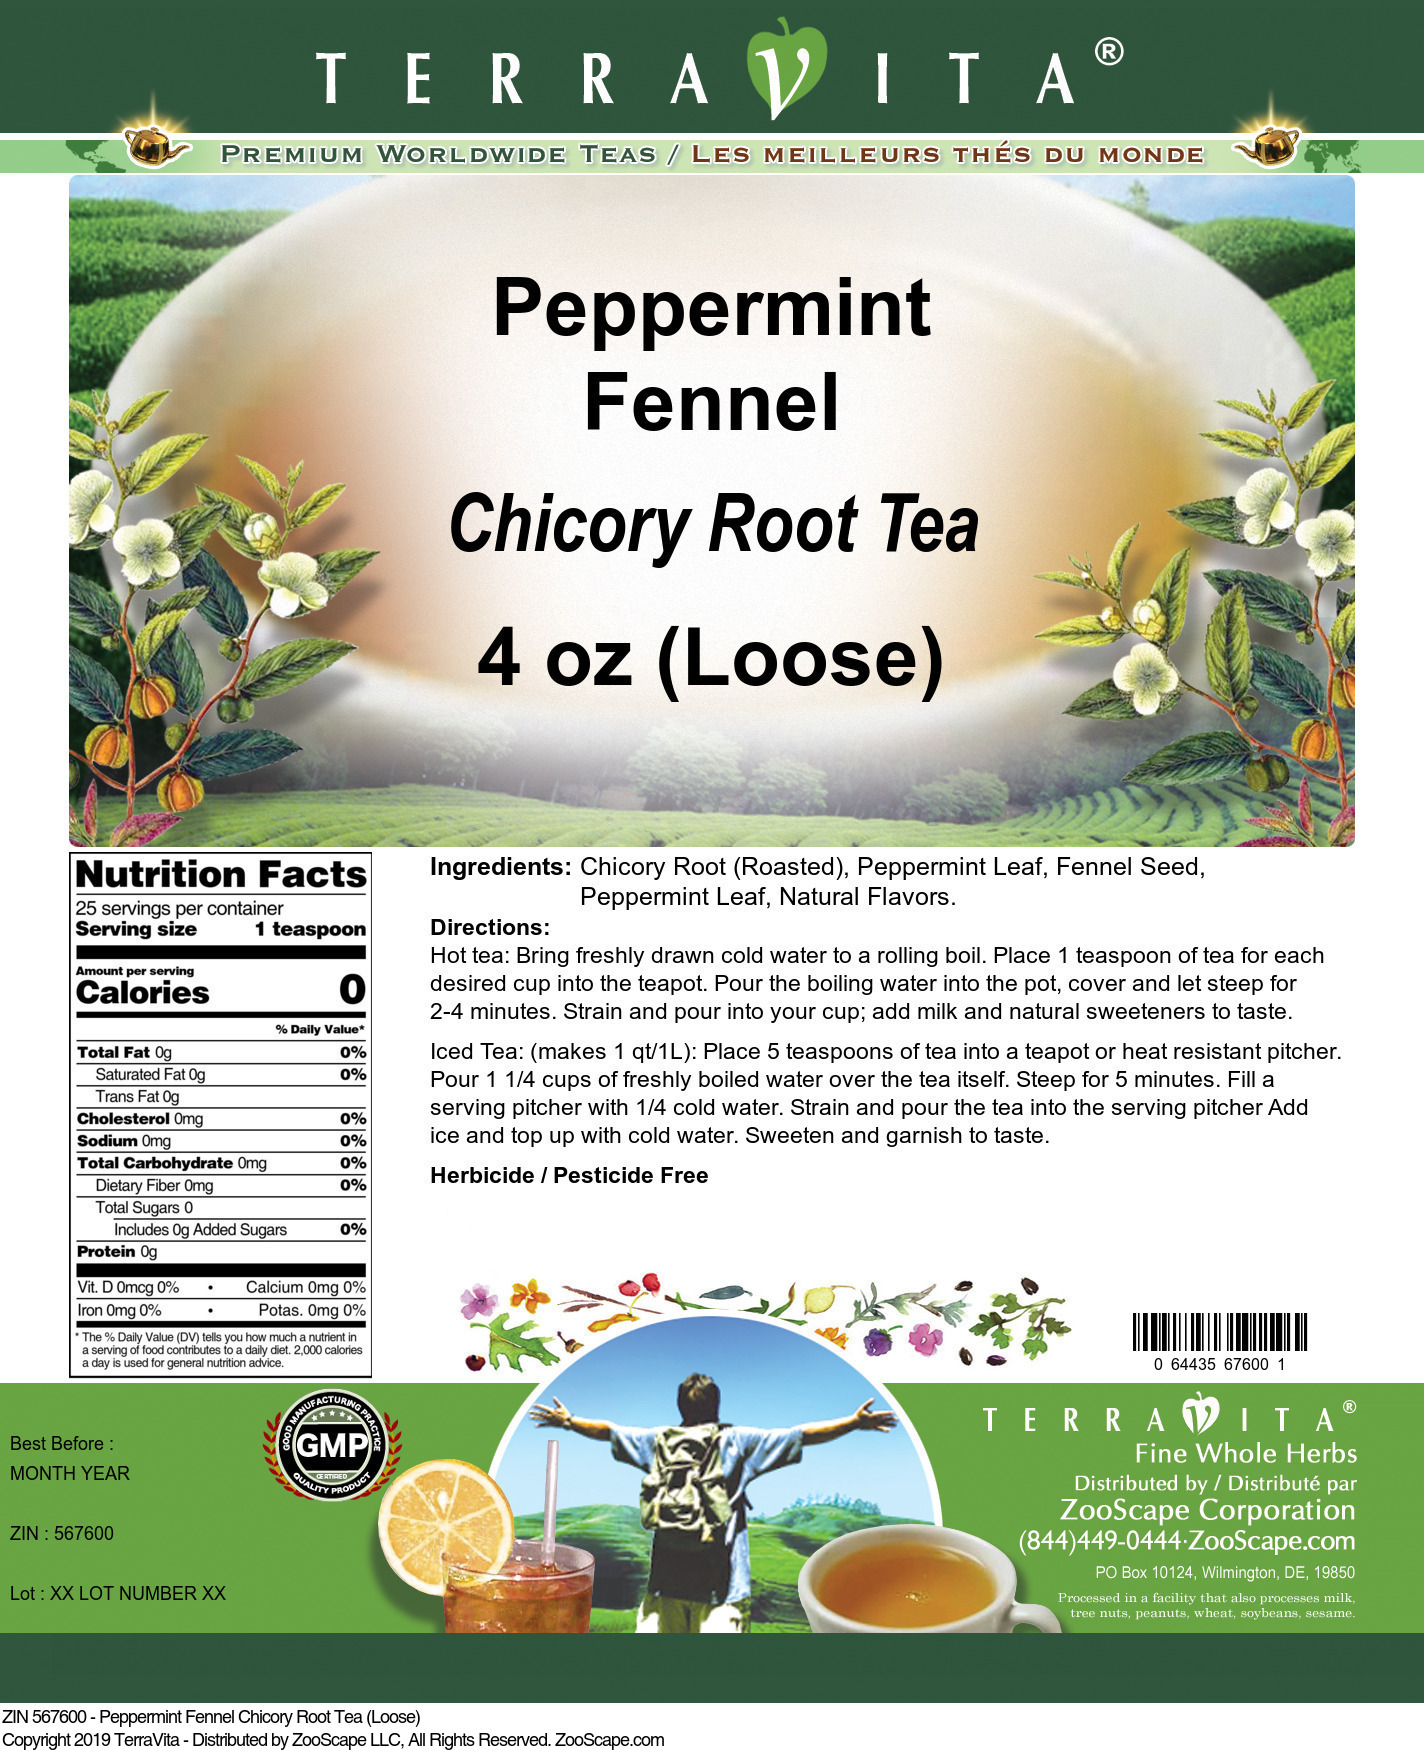 Peppermint Fennel Chicory Root Tea (Loose) - Label